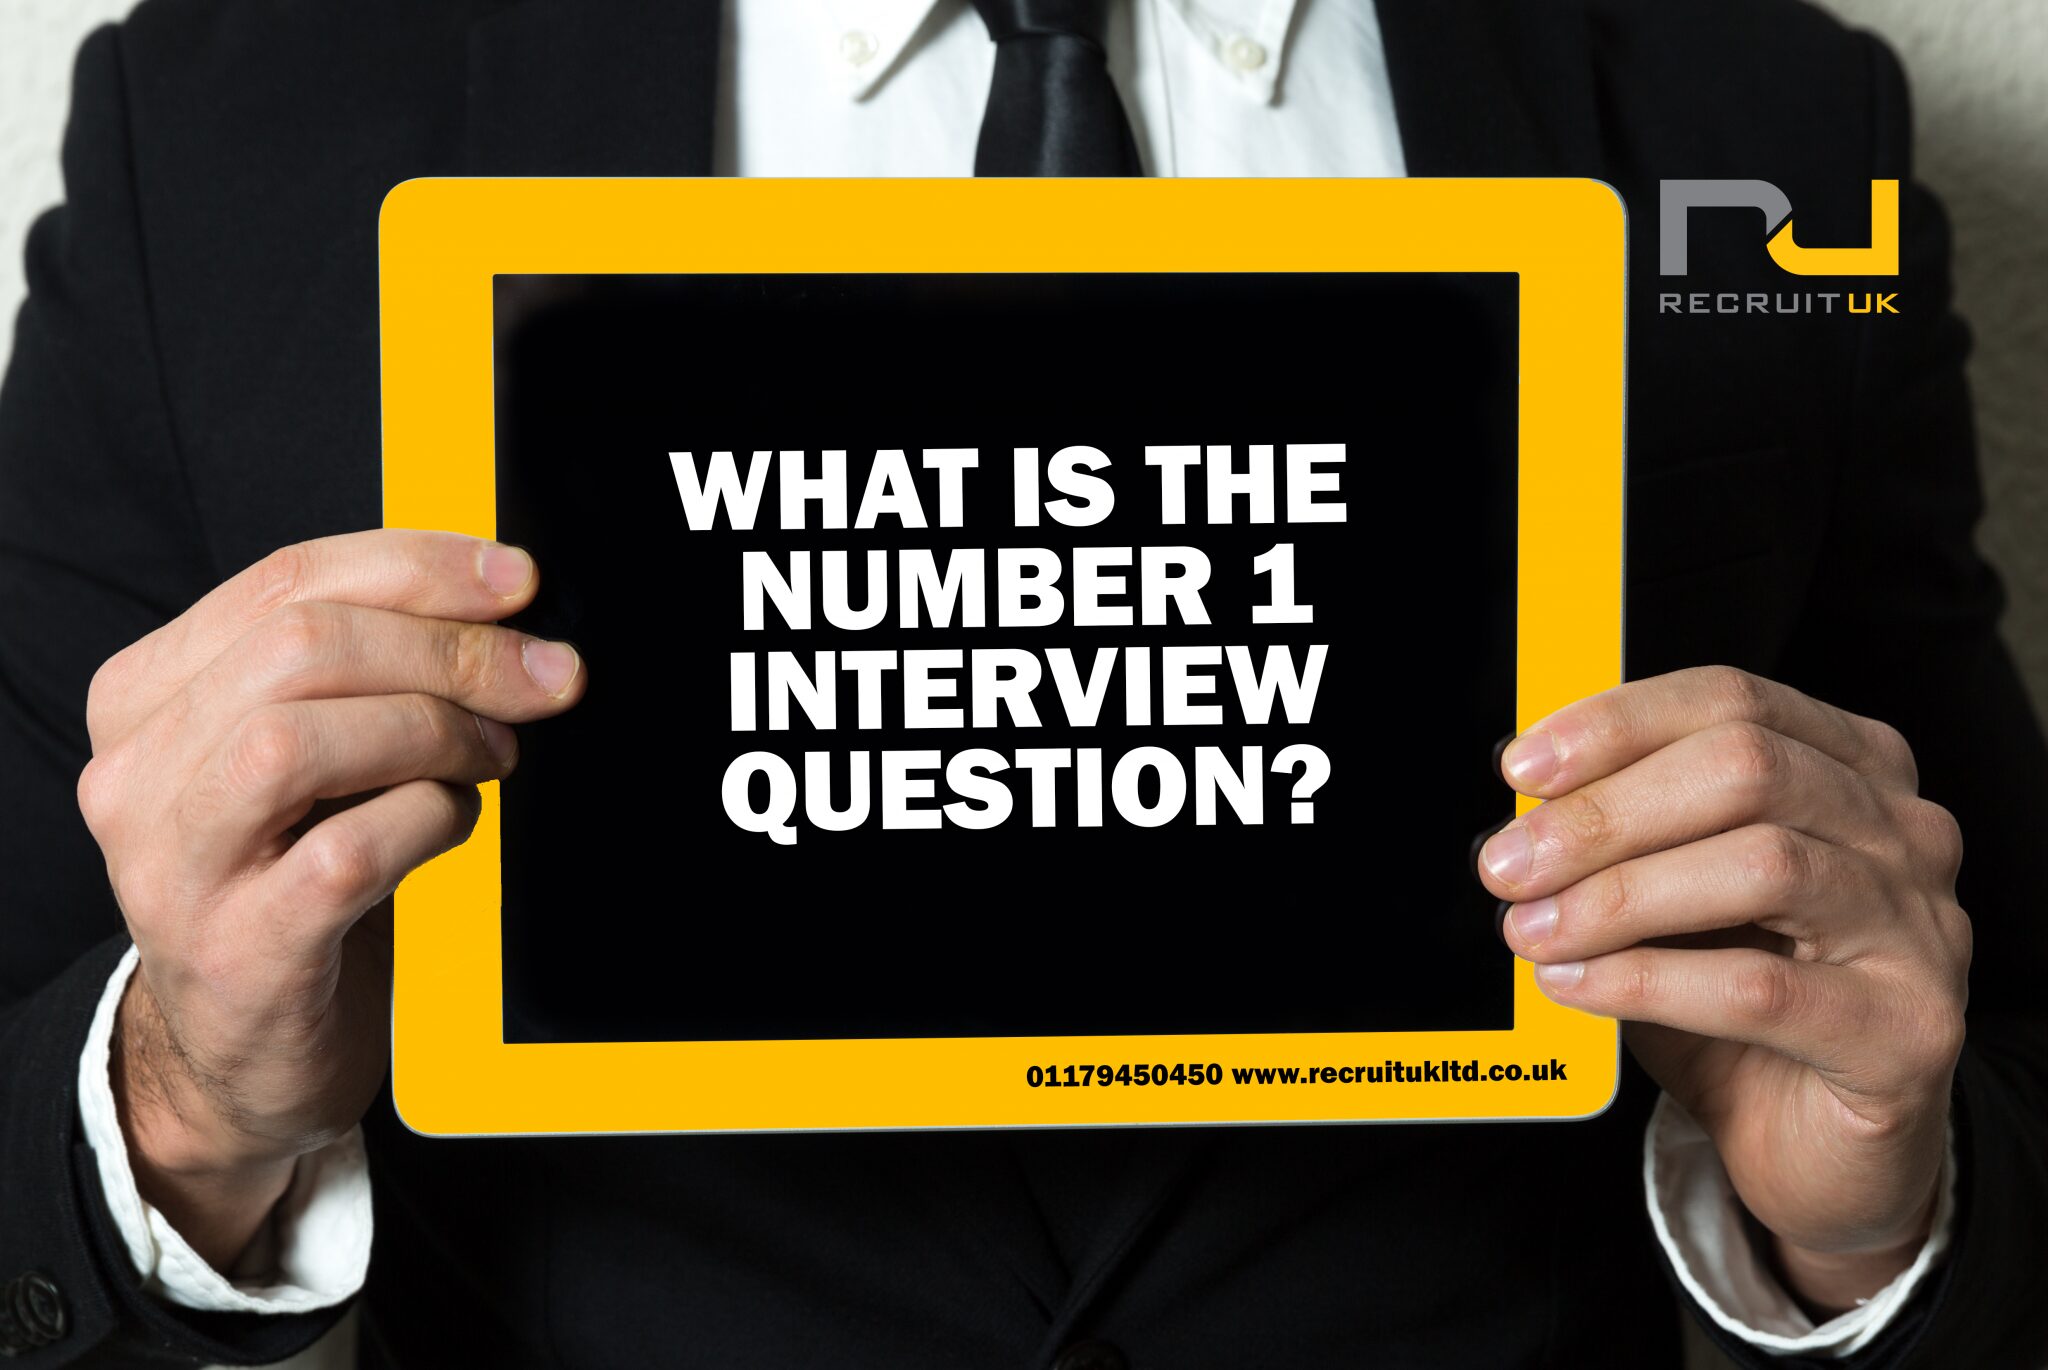 What is the number 1 interview question?